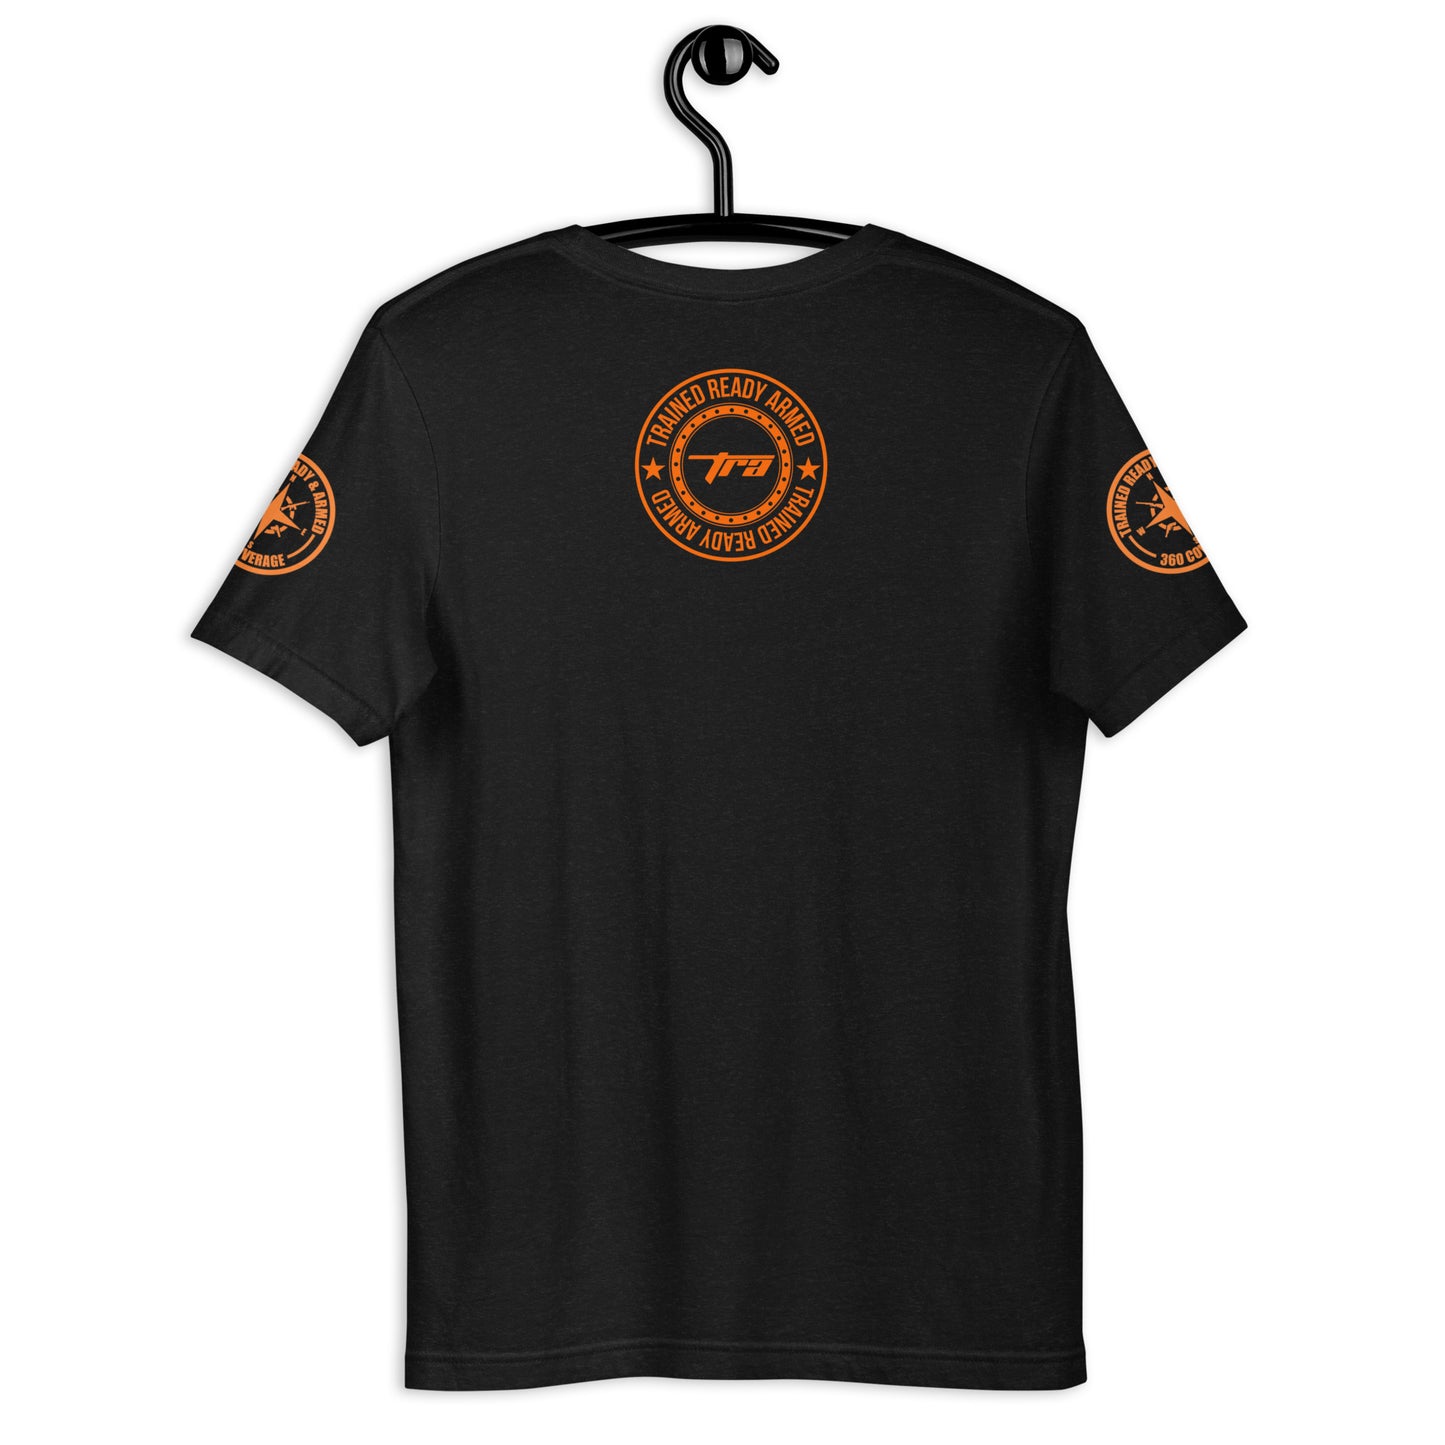 Trained Ready & Armed 1.0 360SL-BO Men's Short Sleeve T-Shirt - Trained Ready Armed Apparel